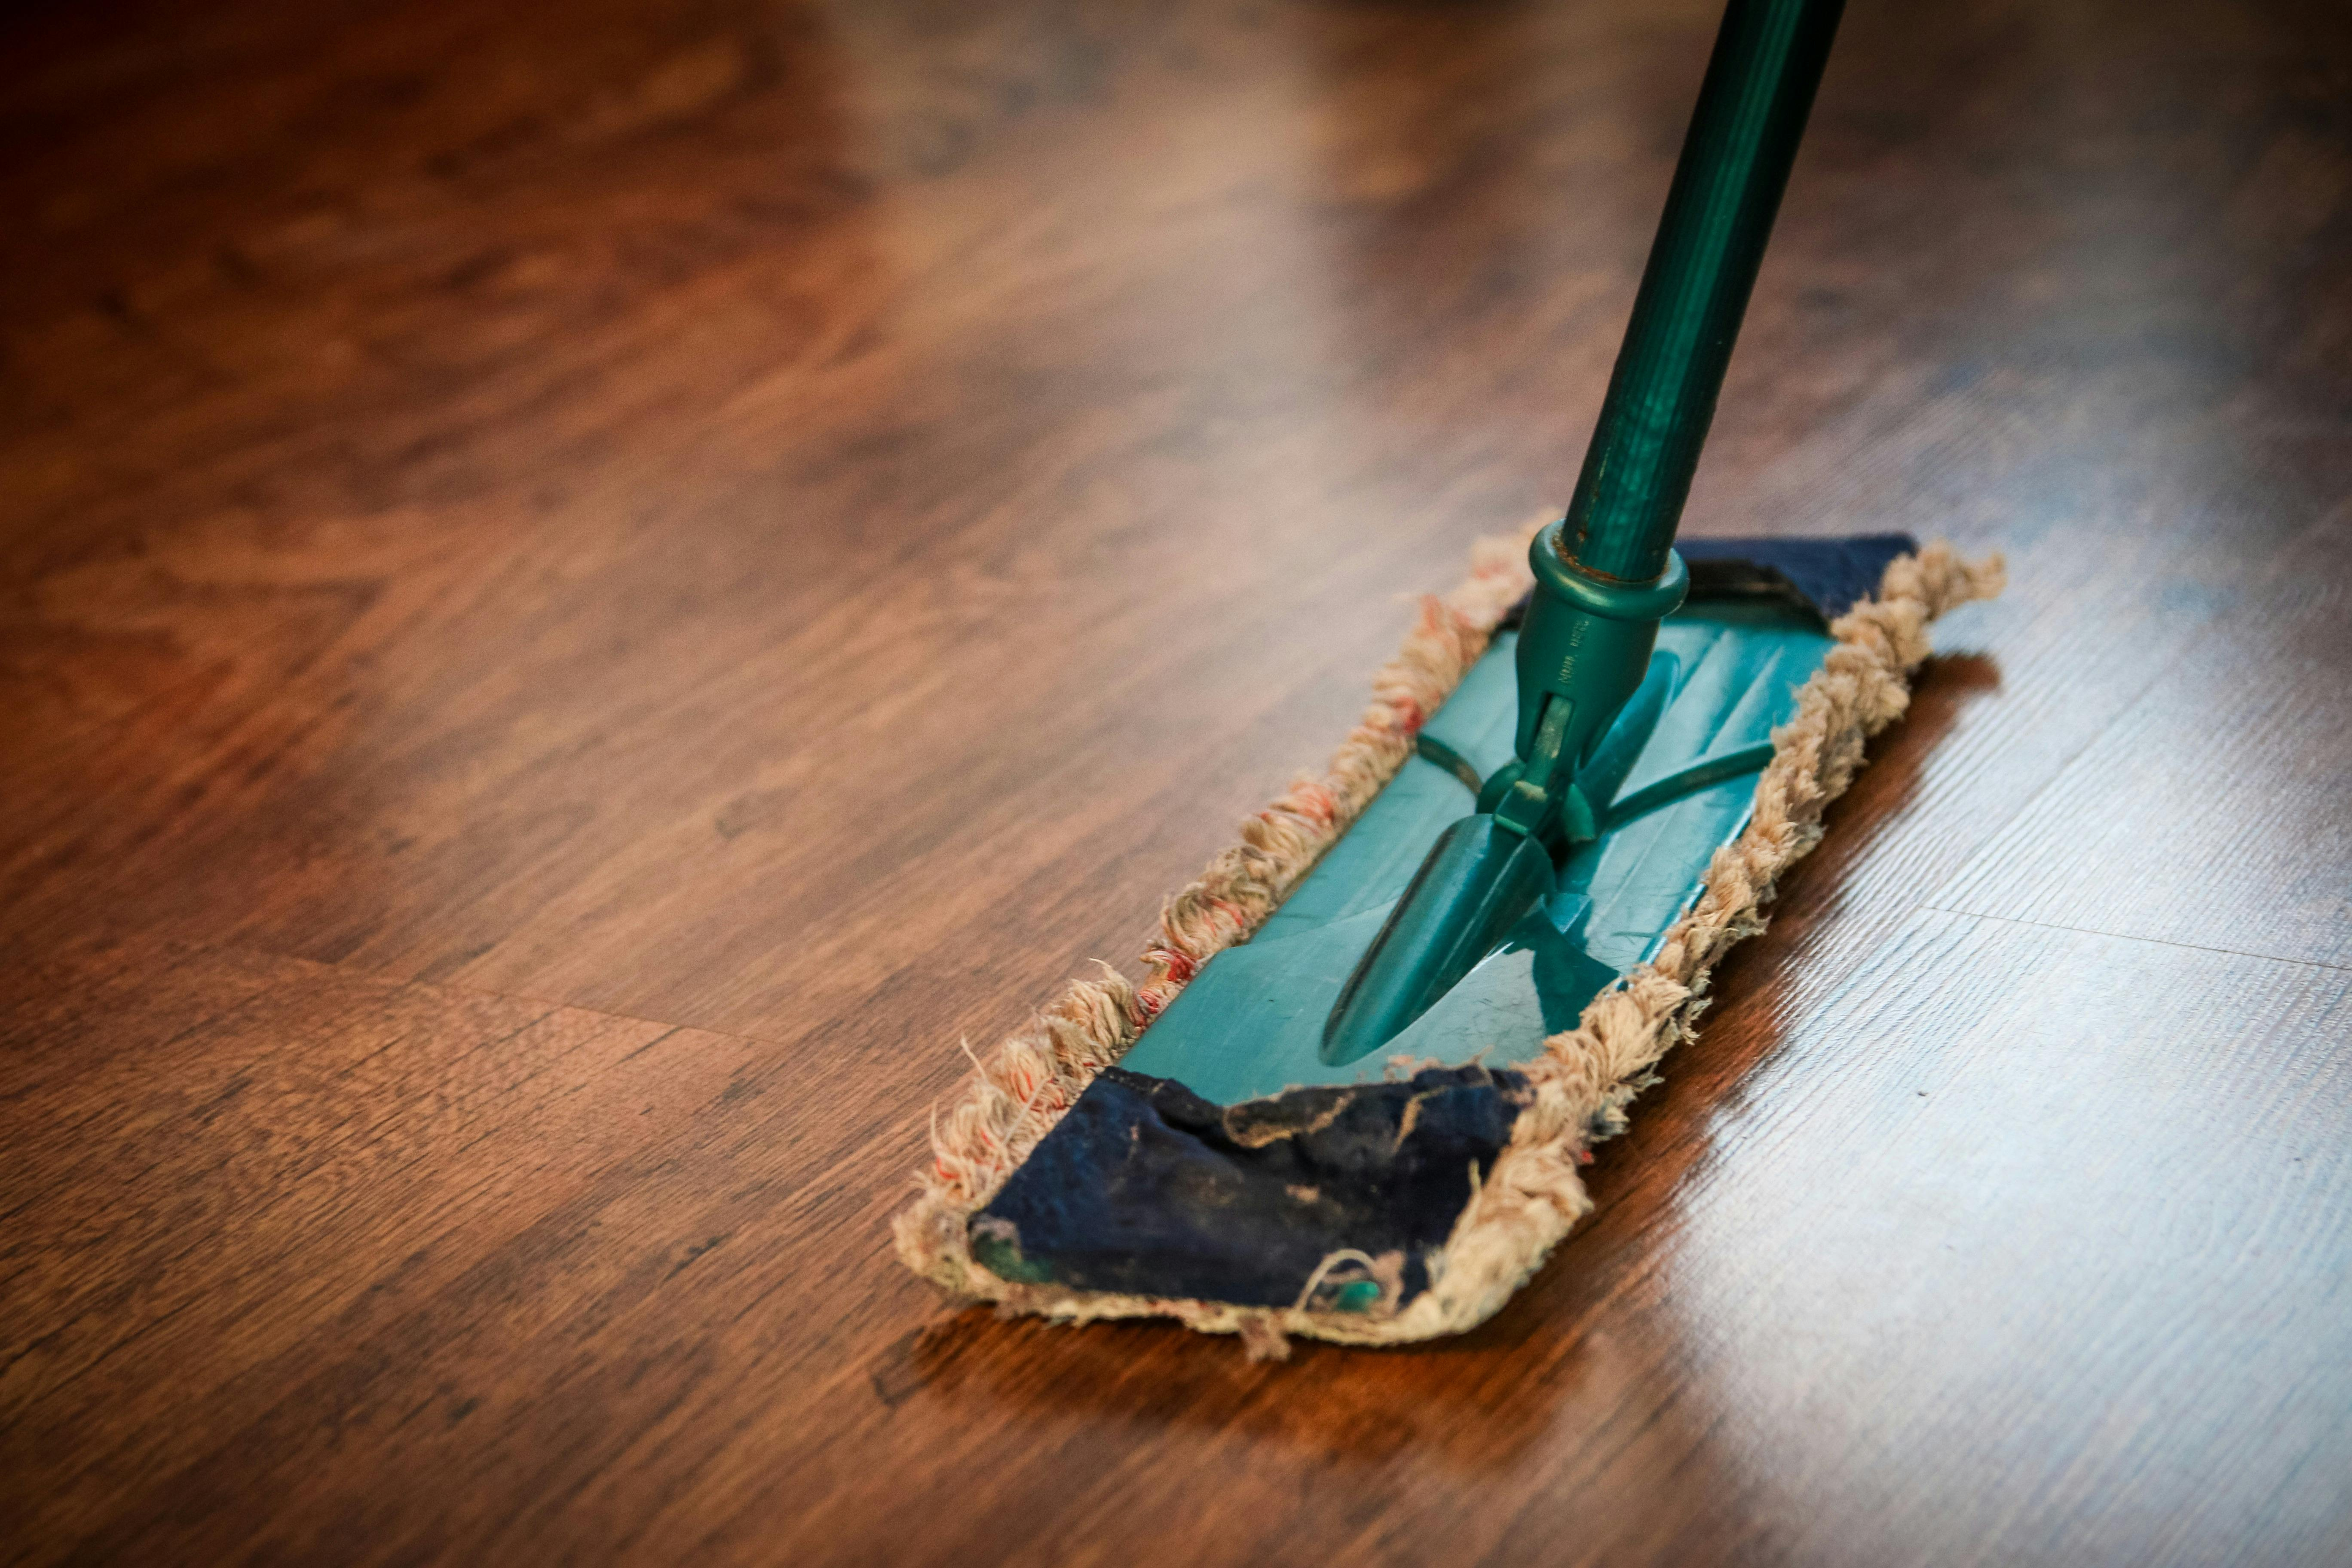 Wood floor being swept with dust mop